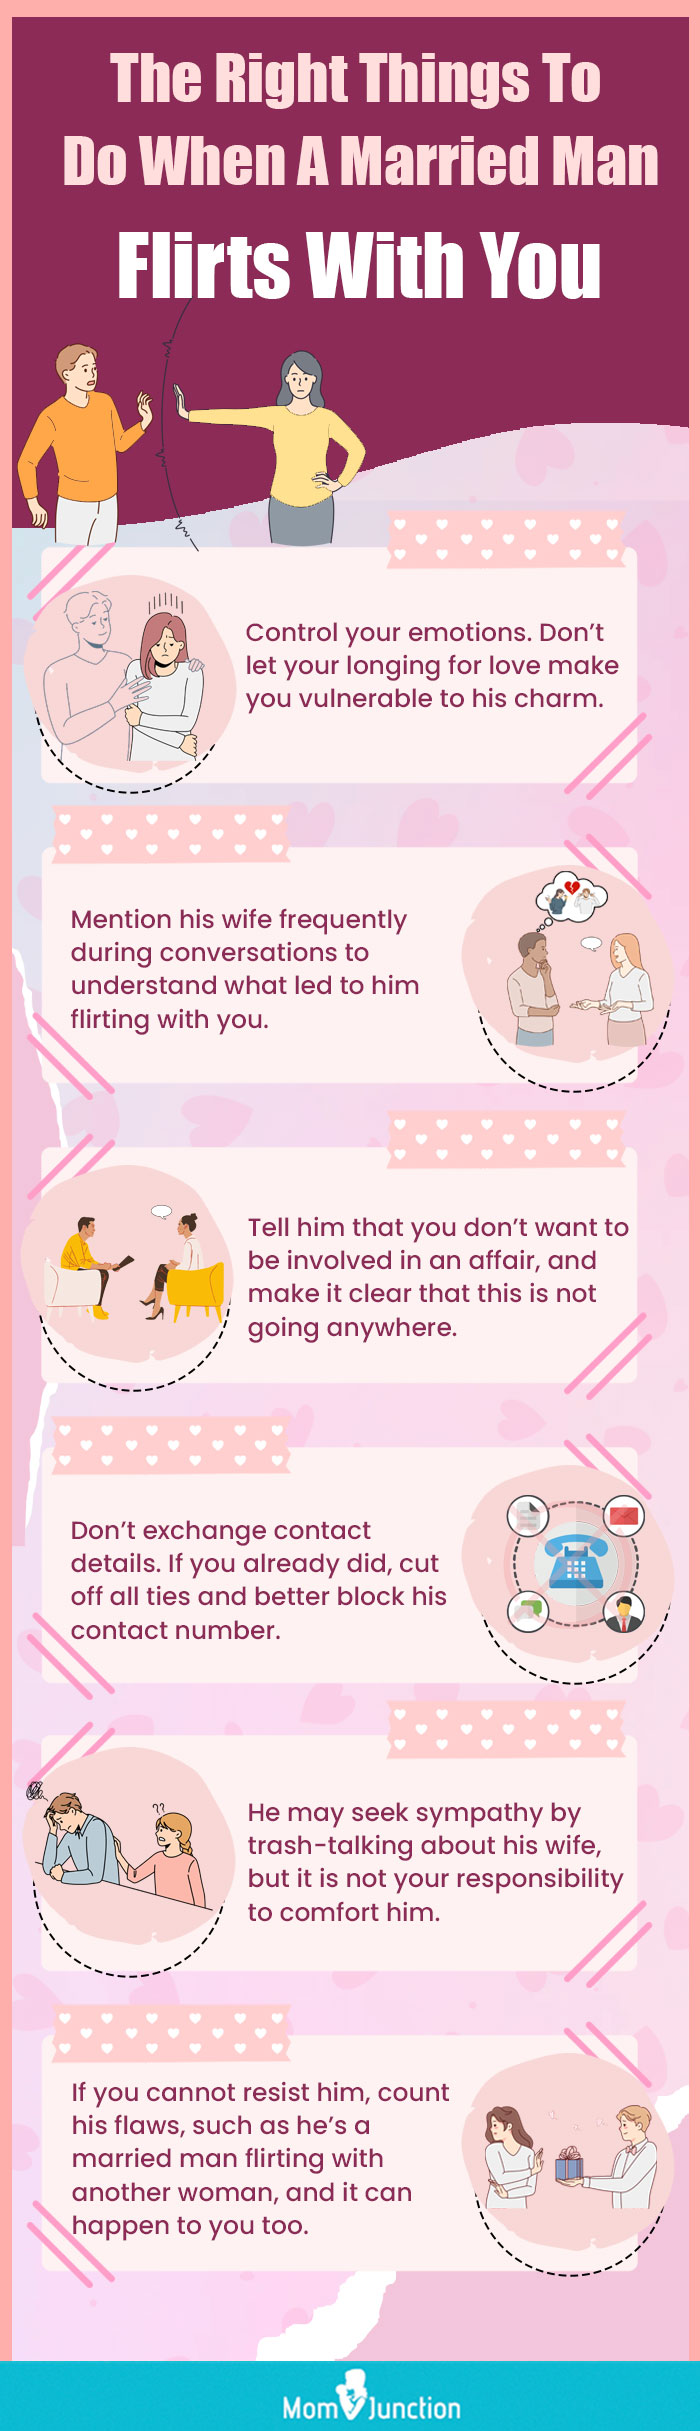 the right things to do when a married man flirts with you [infographic]